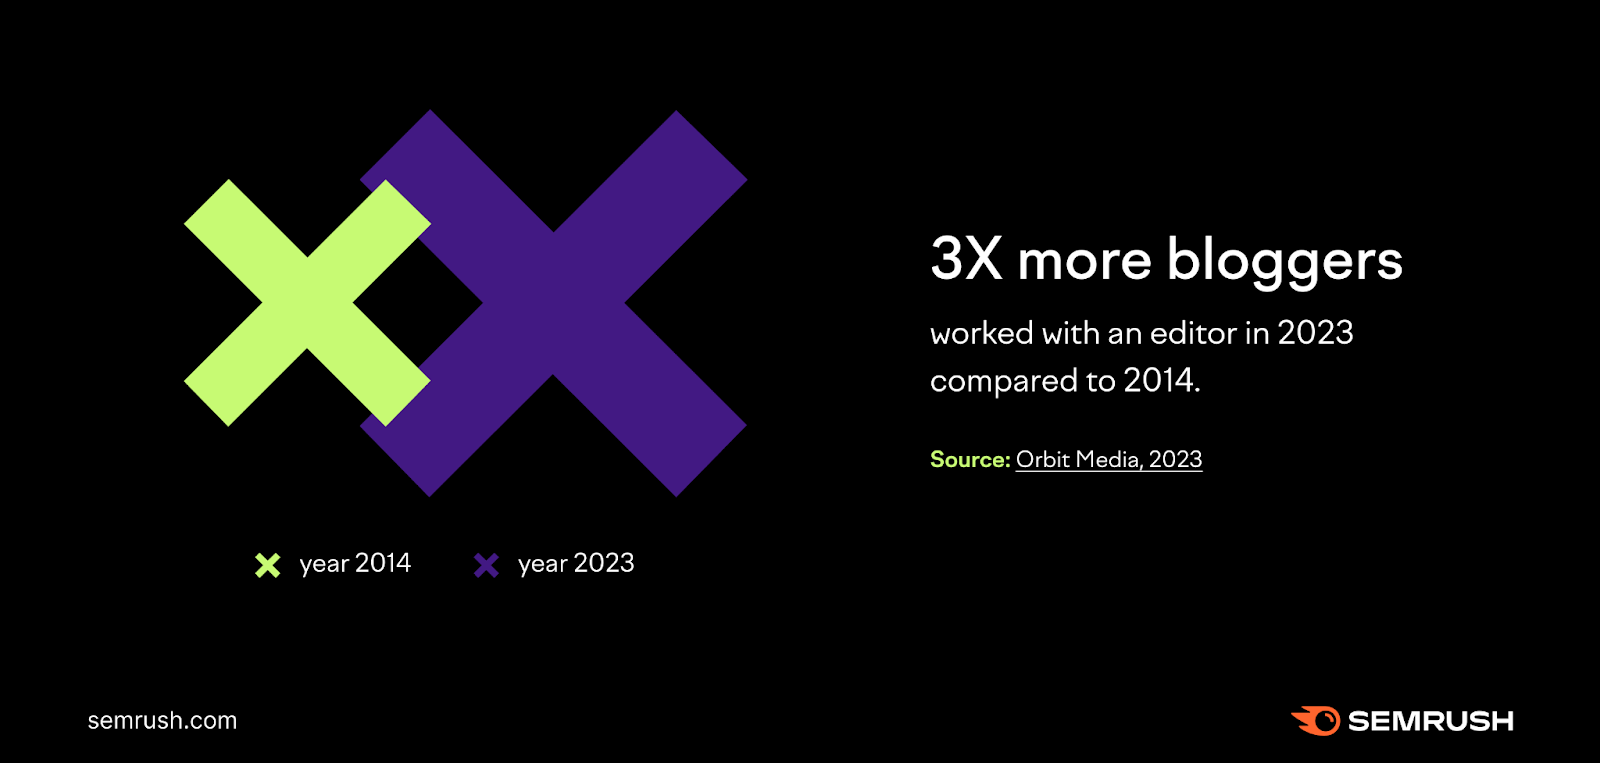 3X more bloggers worked with an editor in 2023 compared to 2014.